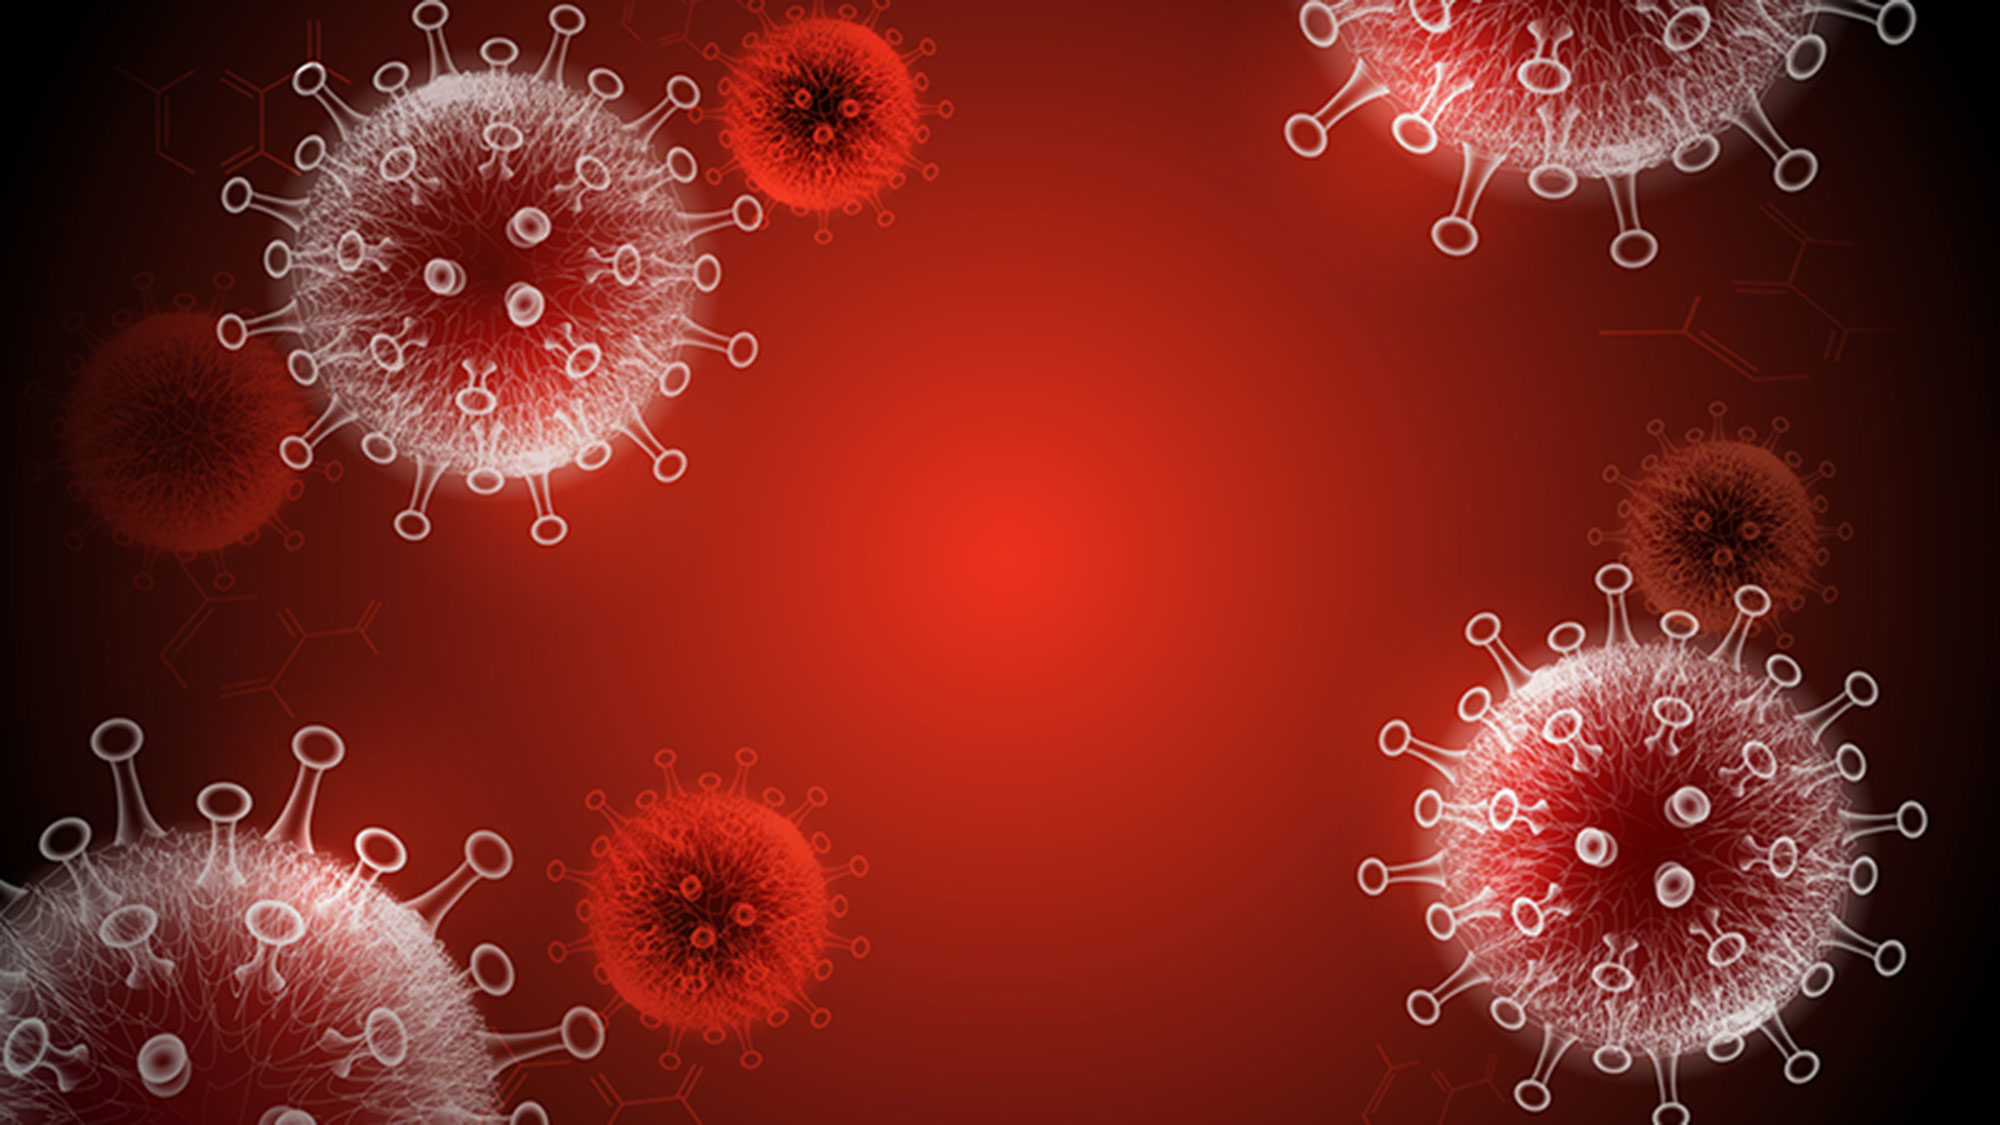 Illustration of viruses with a red background.